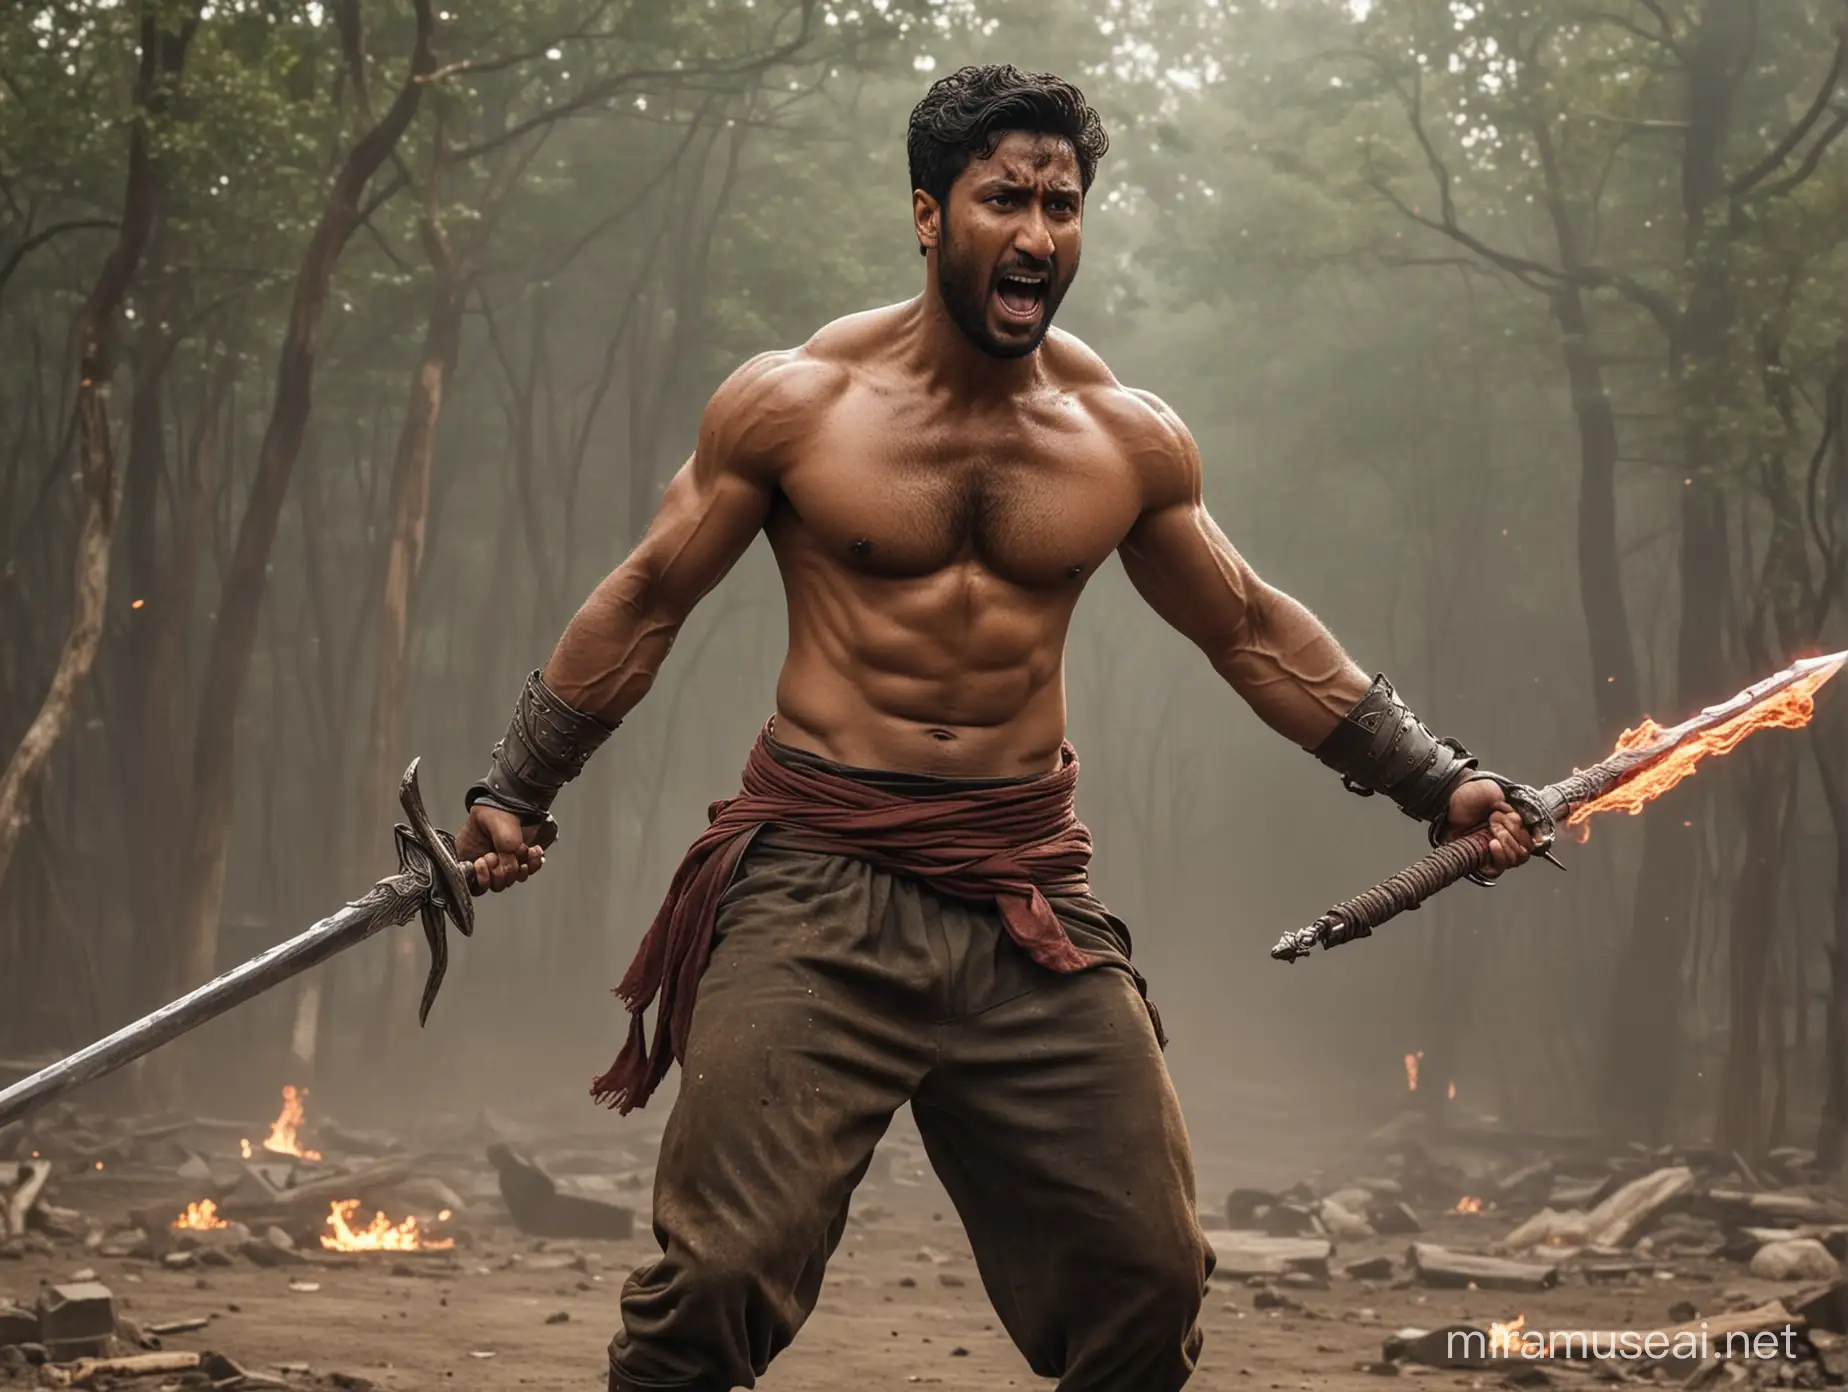 Muscular Vicky Kaushal MidAir Sword Fight with Demon